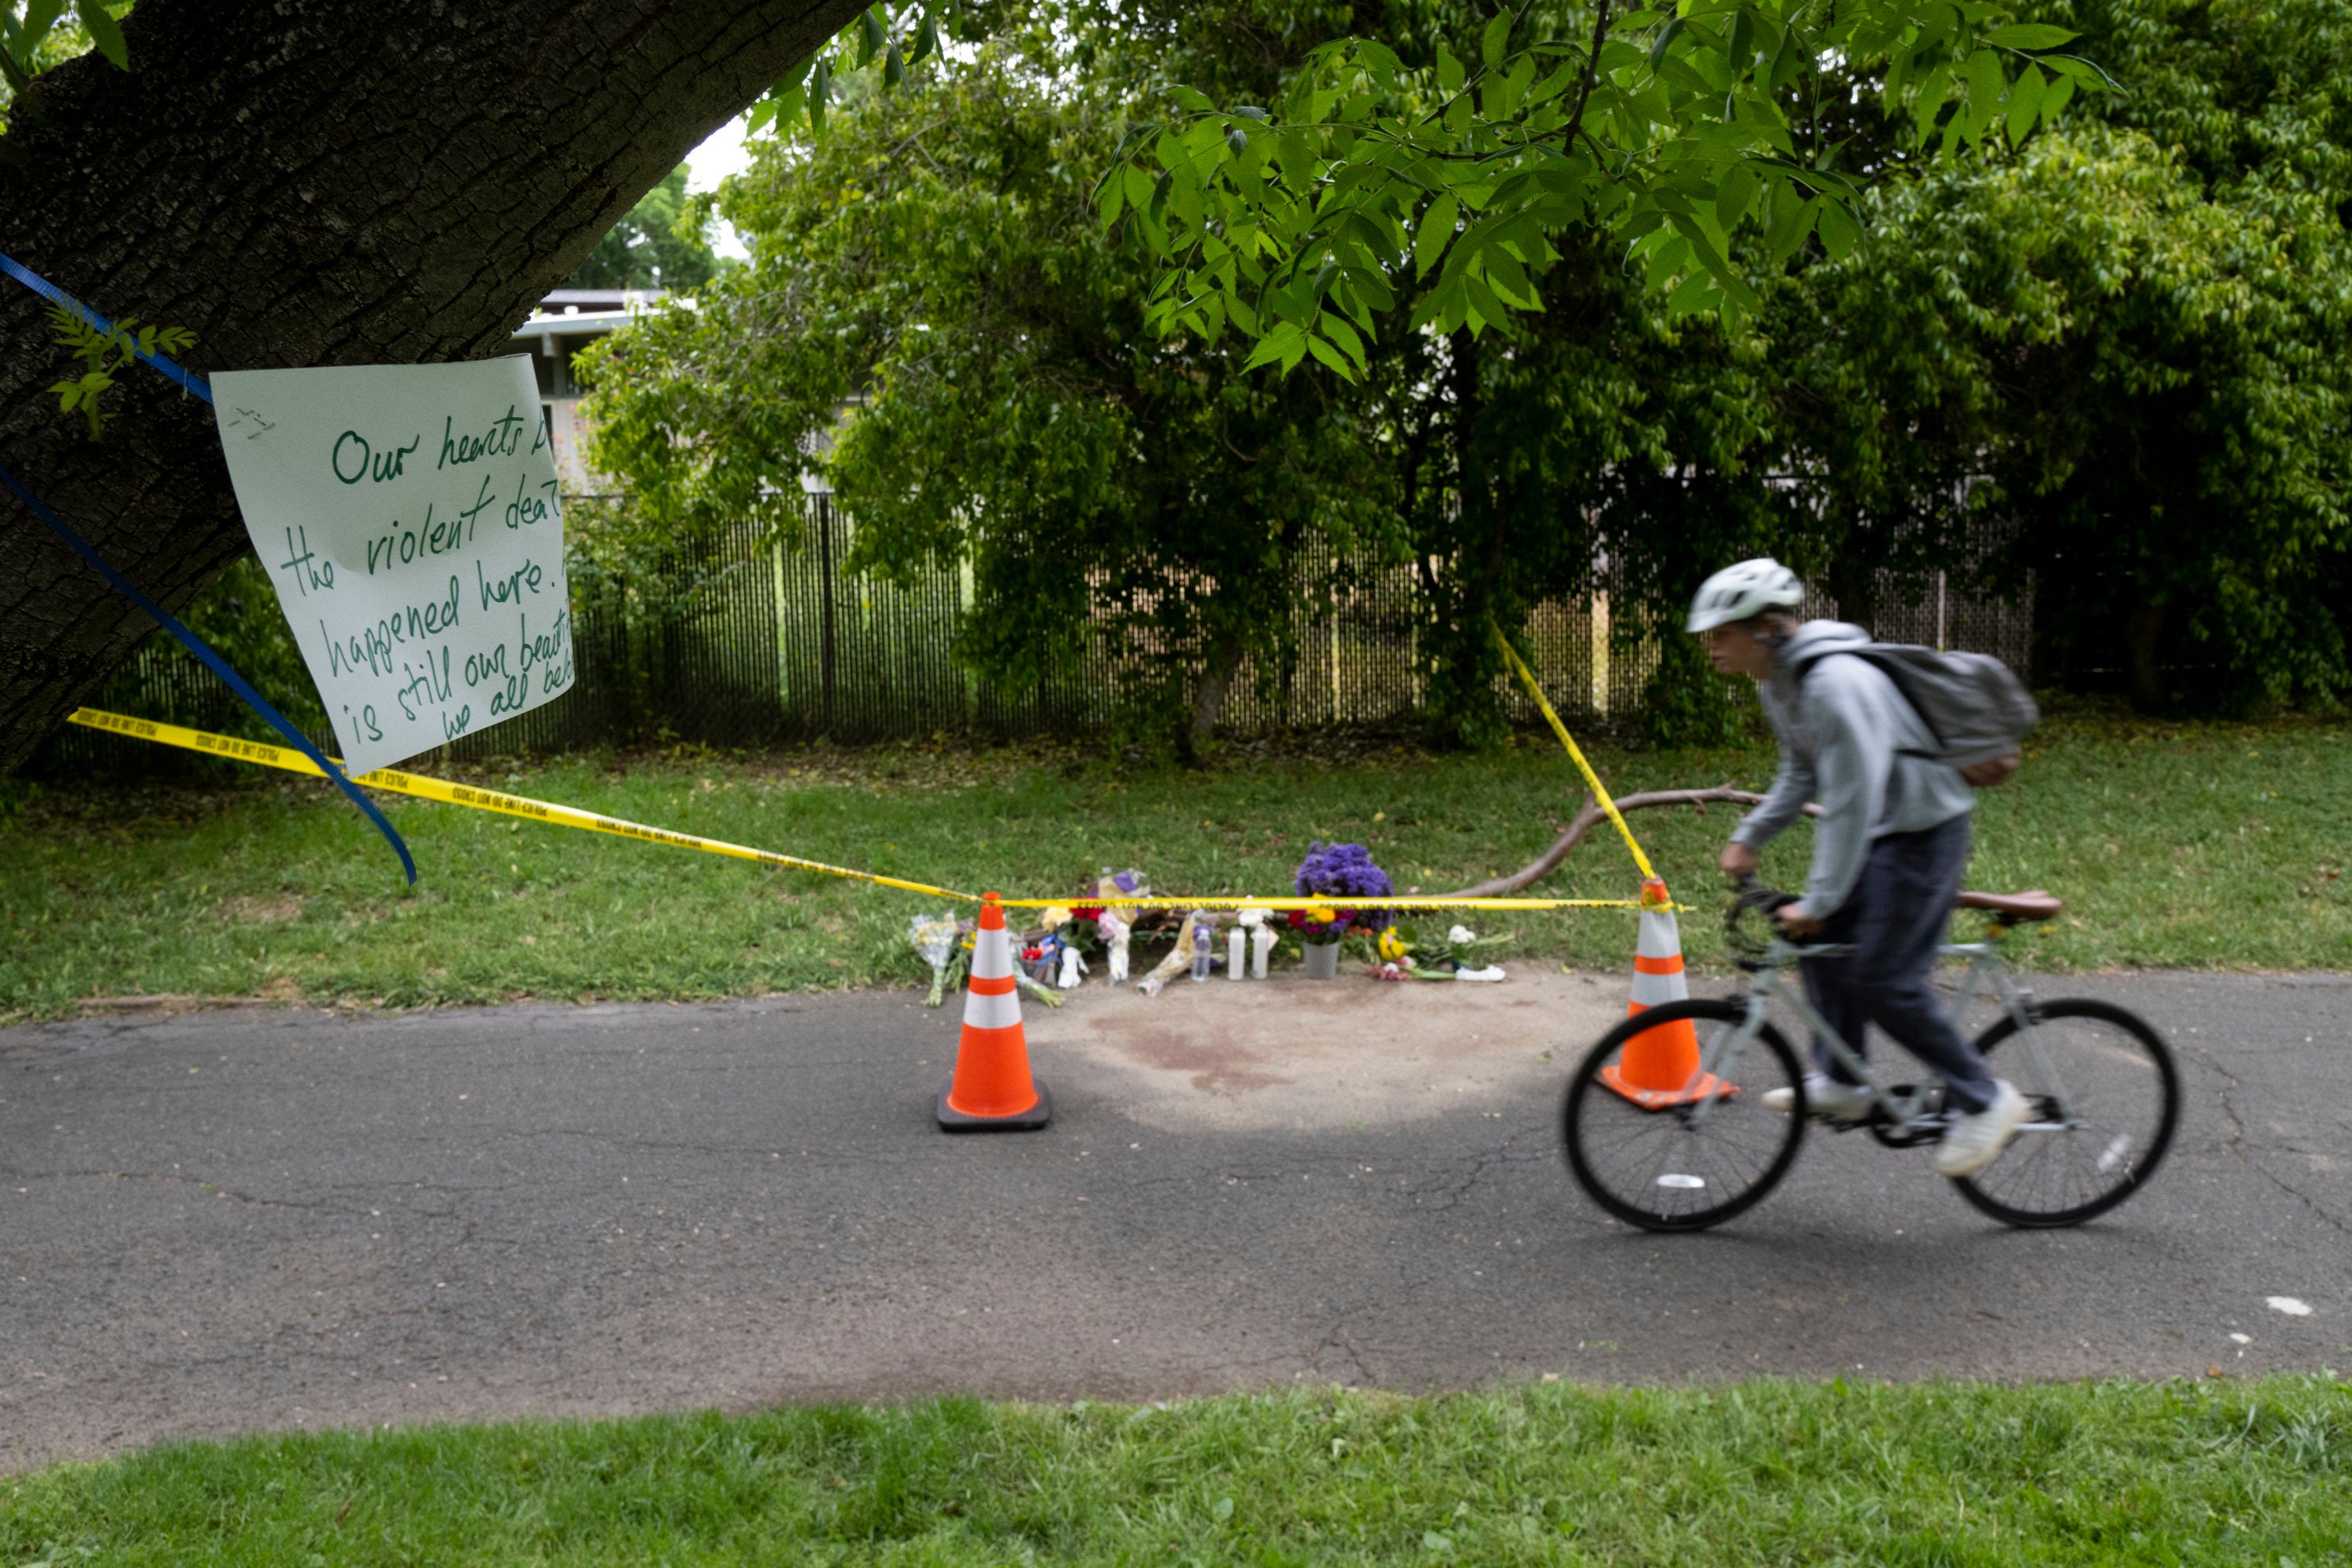 A cyclist rides past a memorial of flowers marking the location that Karim Abou Najm, a graduating senior at UC Davis, was fatally stabbed in Sycamore Park in Davis